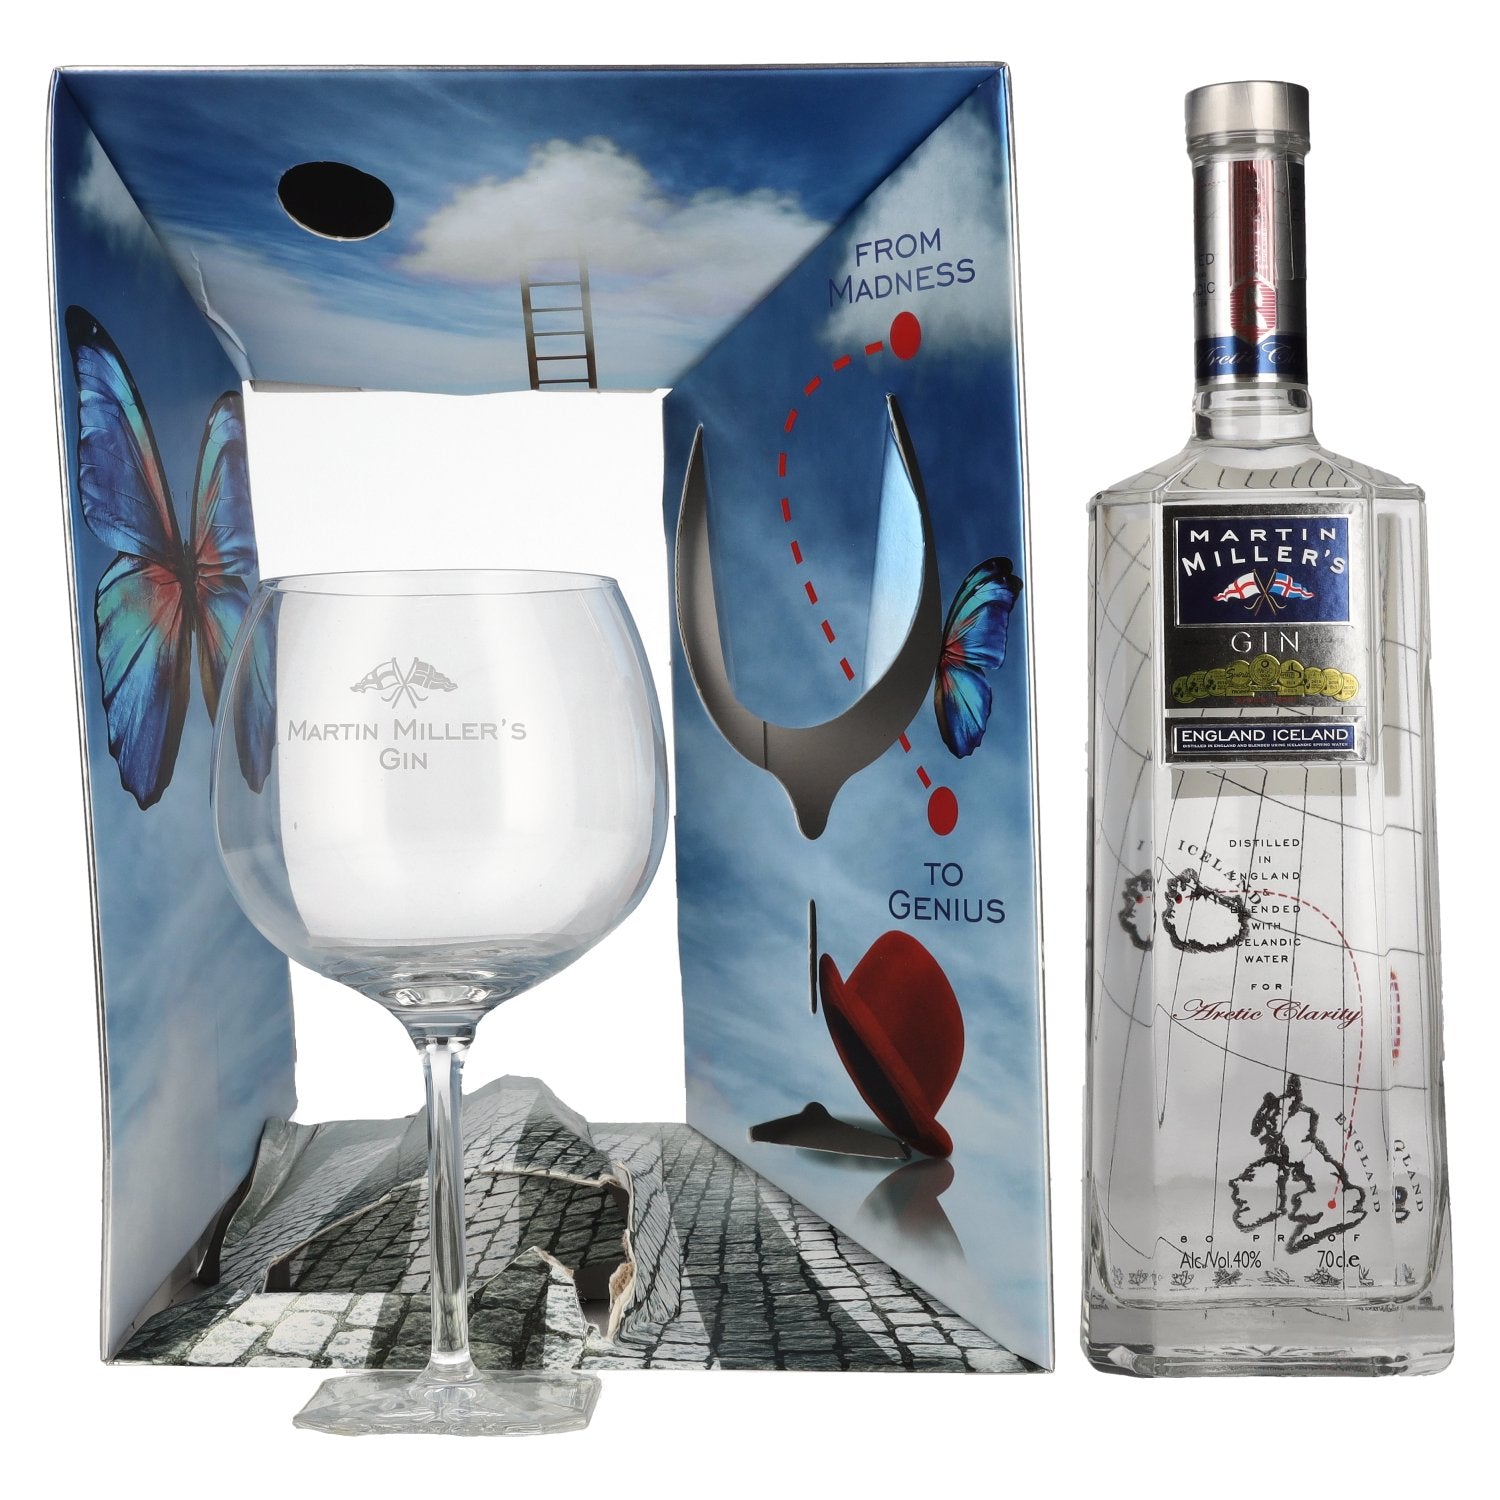 Martin Miller's Gin 40% Vol. 0,7l in Giftbox with glass